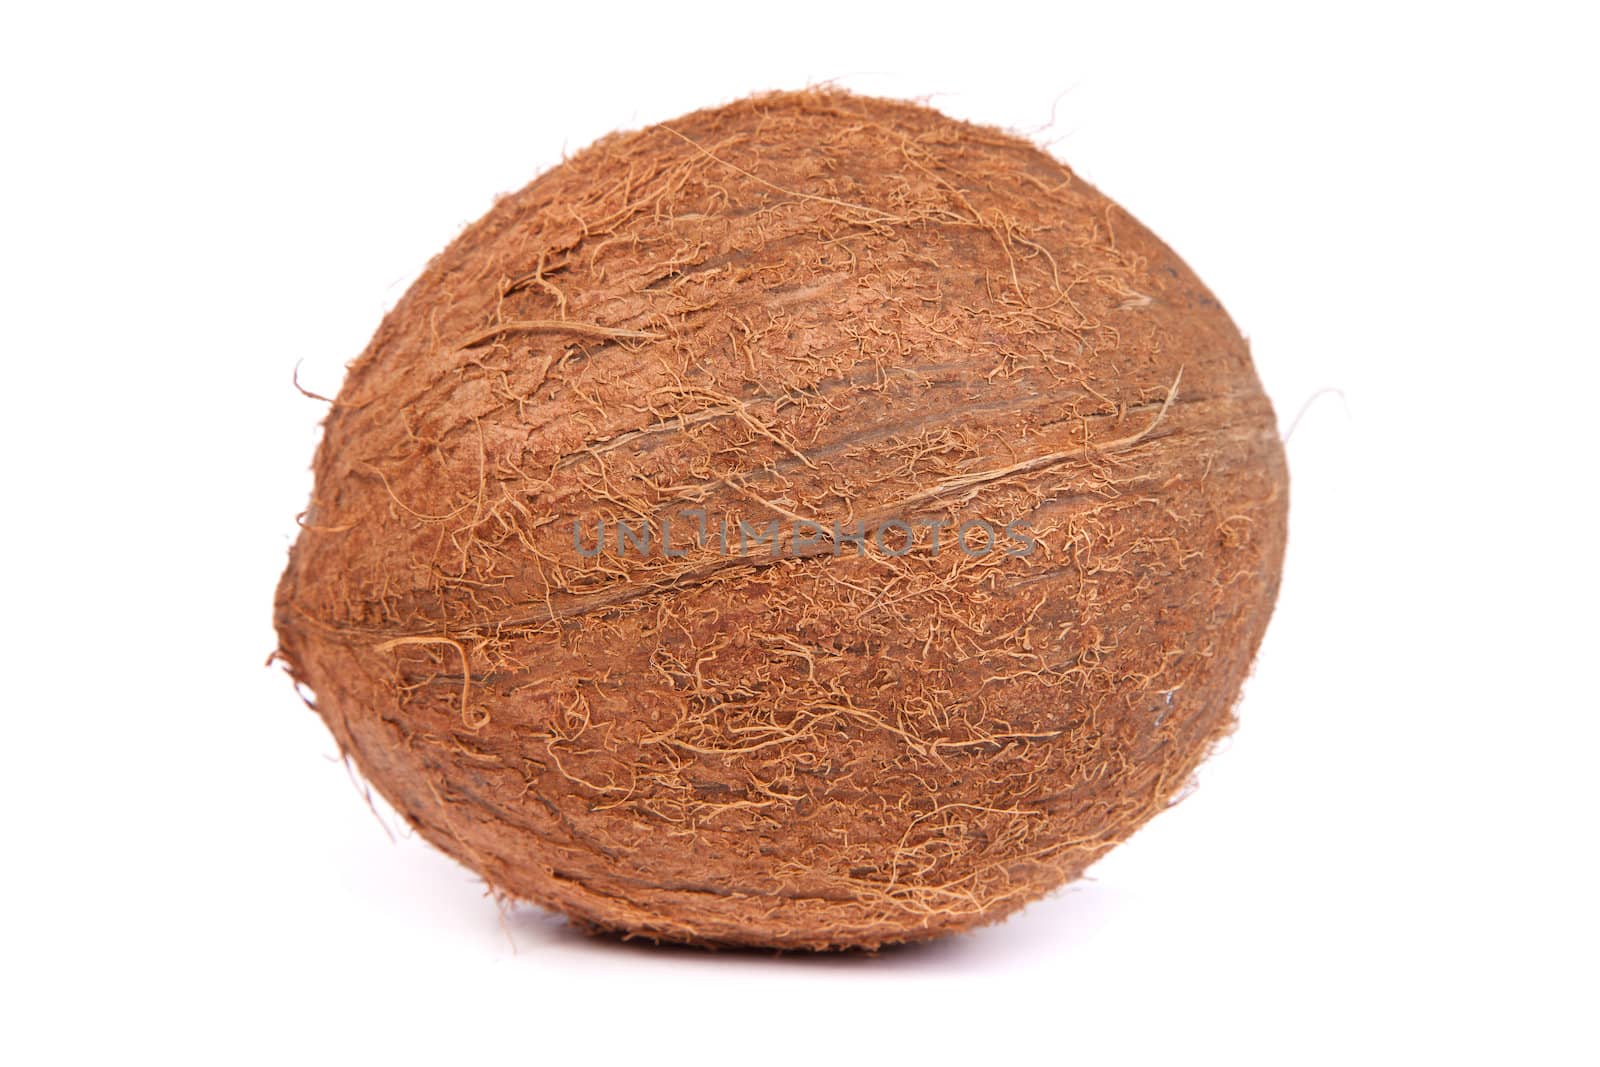 A high resolution photo of a coconut on a white background.